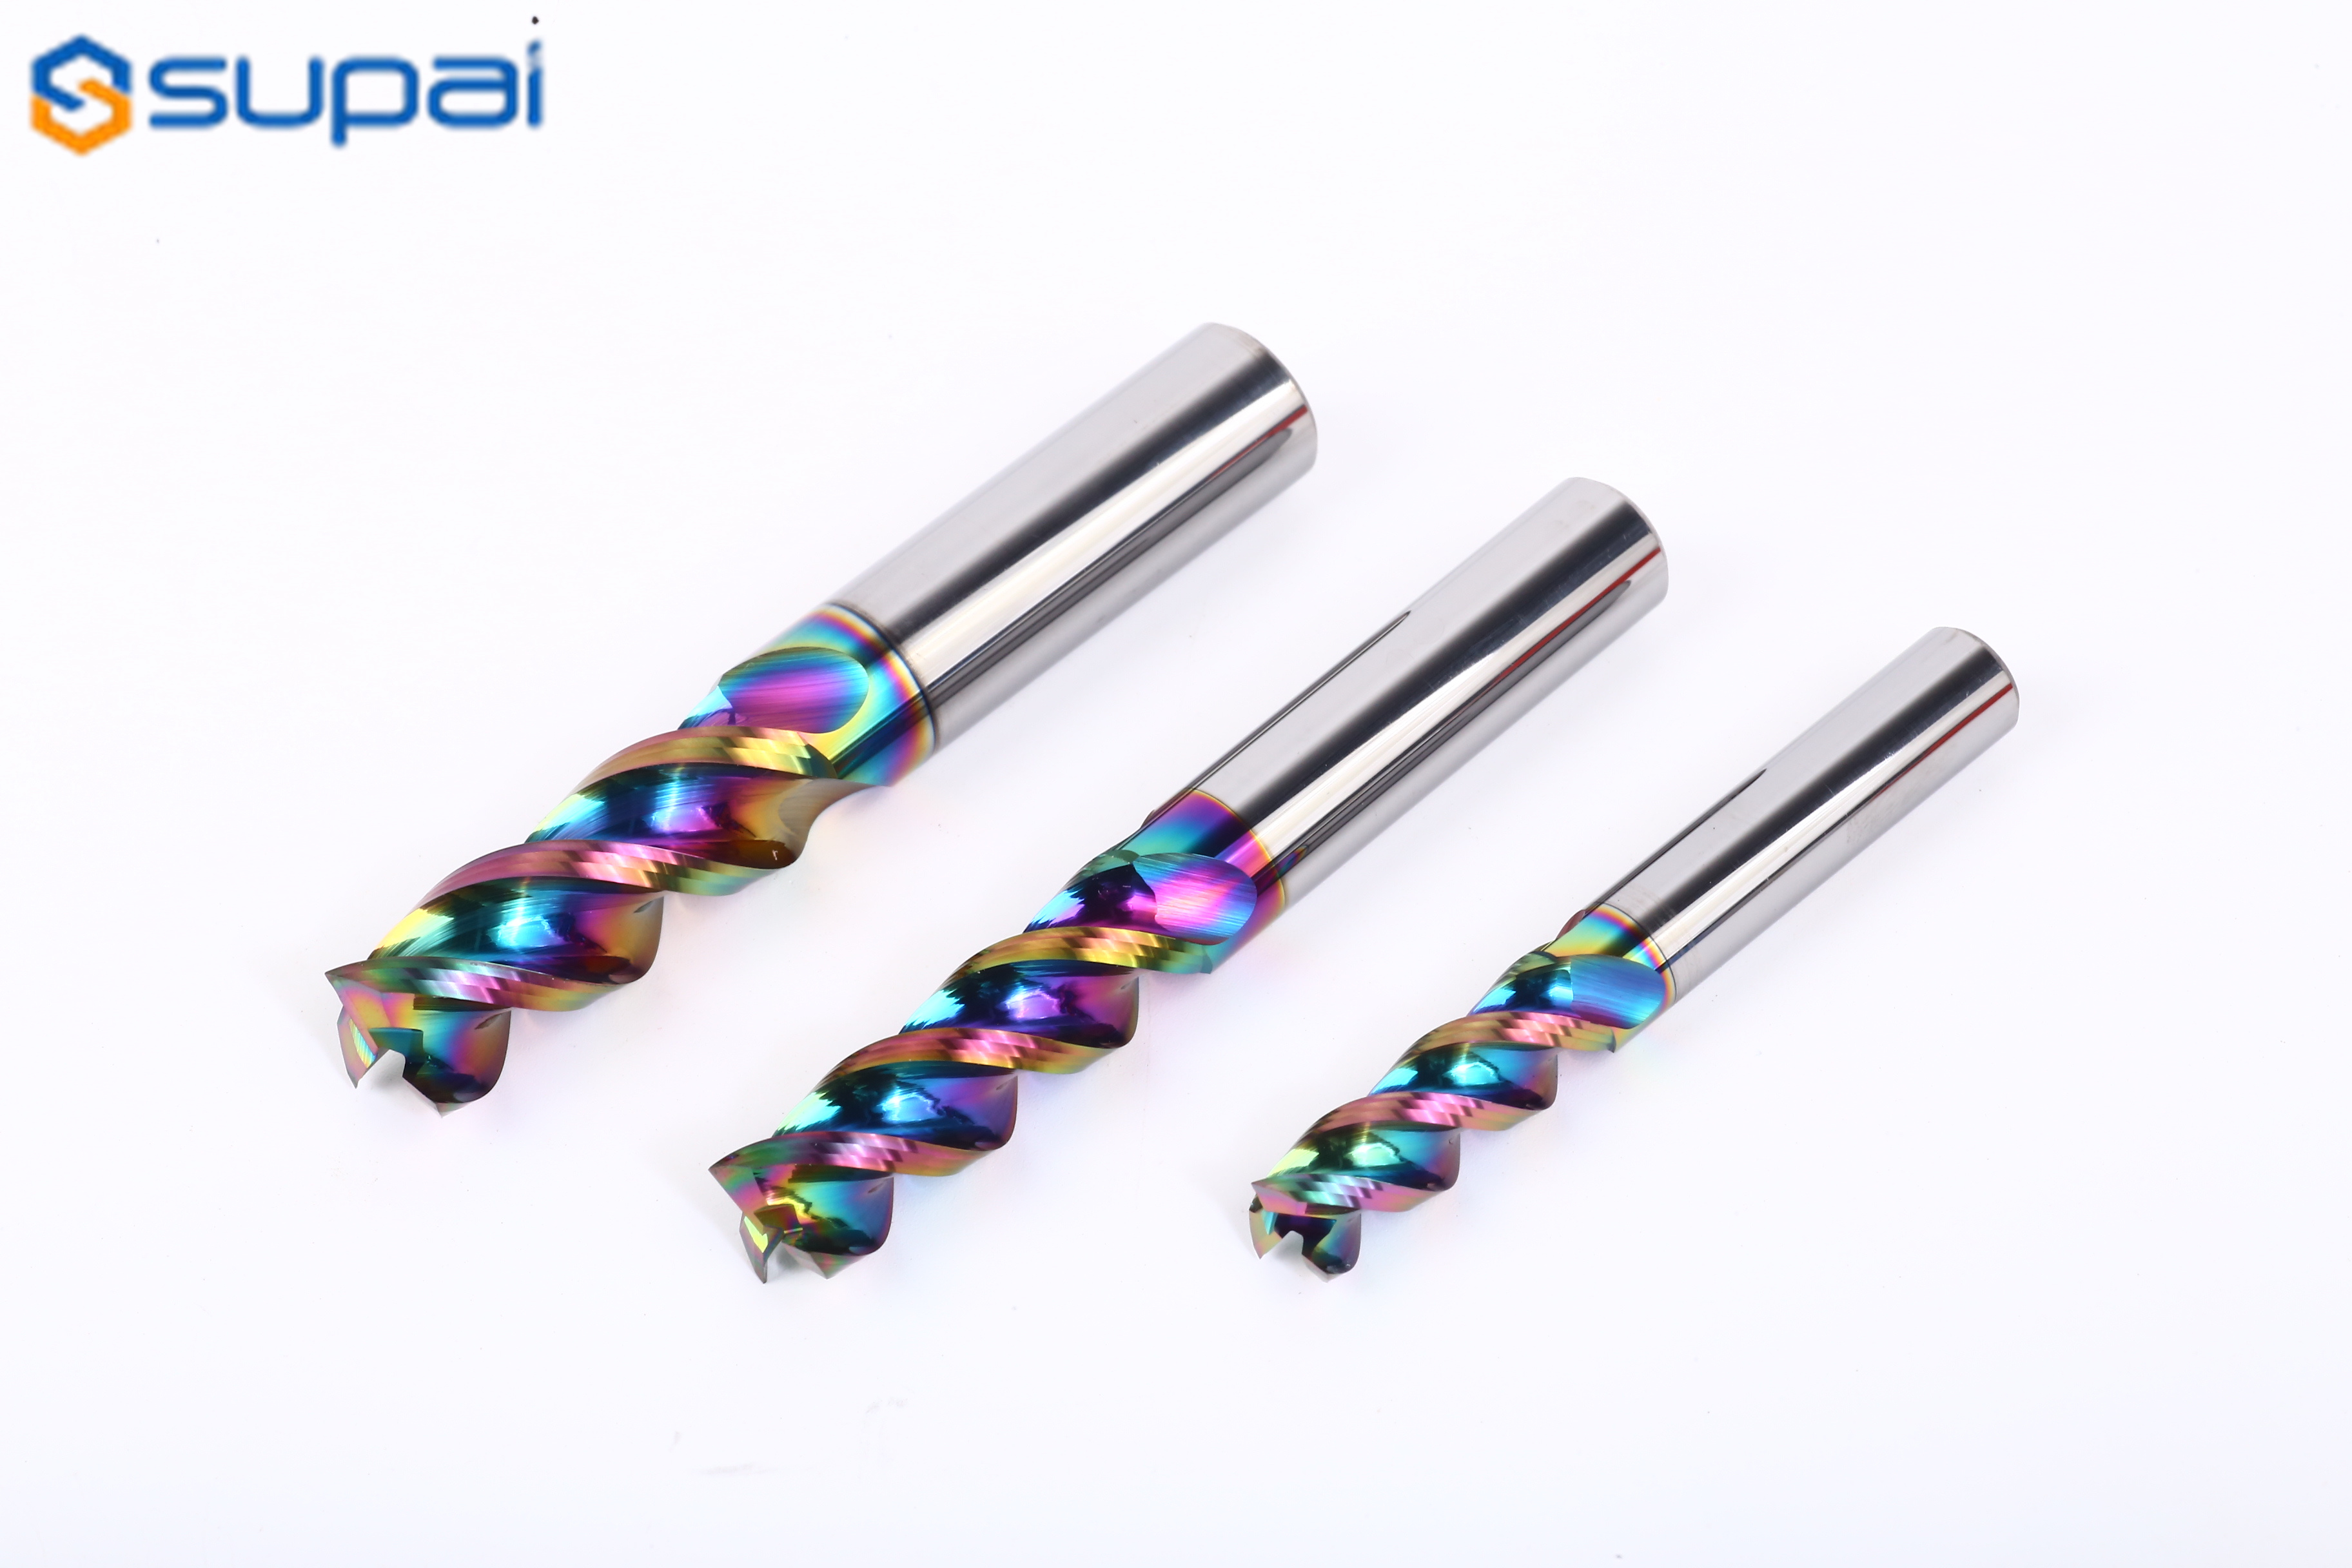 milling cutters for aluminum with rainbow coating